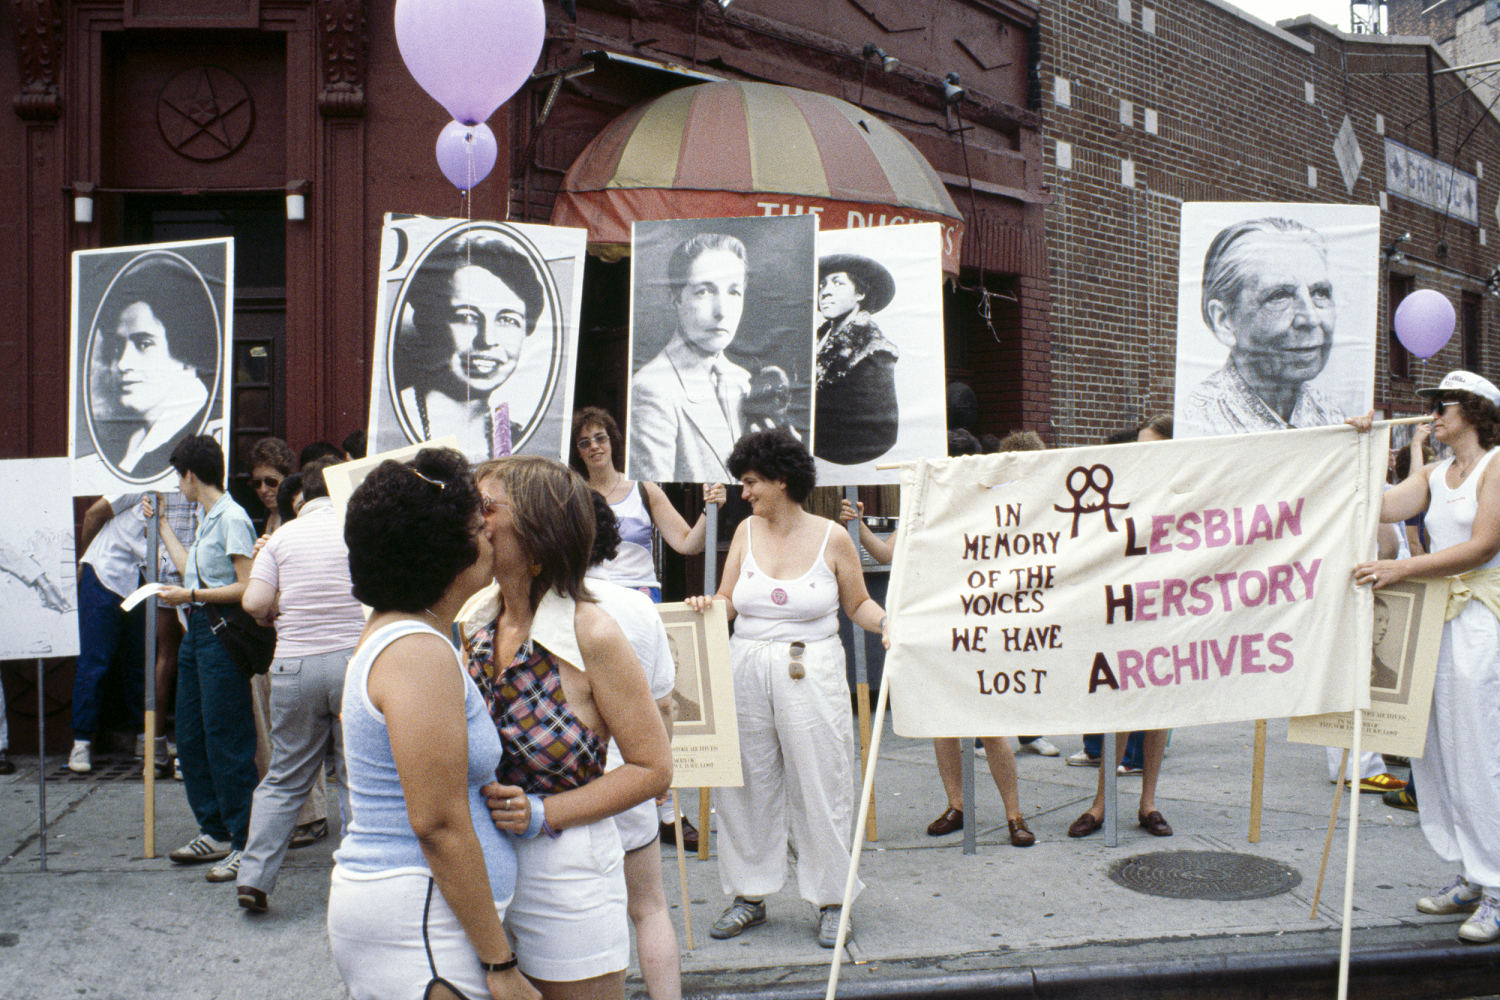 a lesbian archive inside a brooklyn brownstone has documented decades of sapphic history